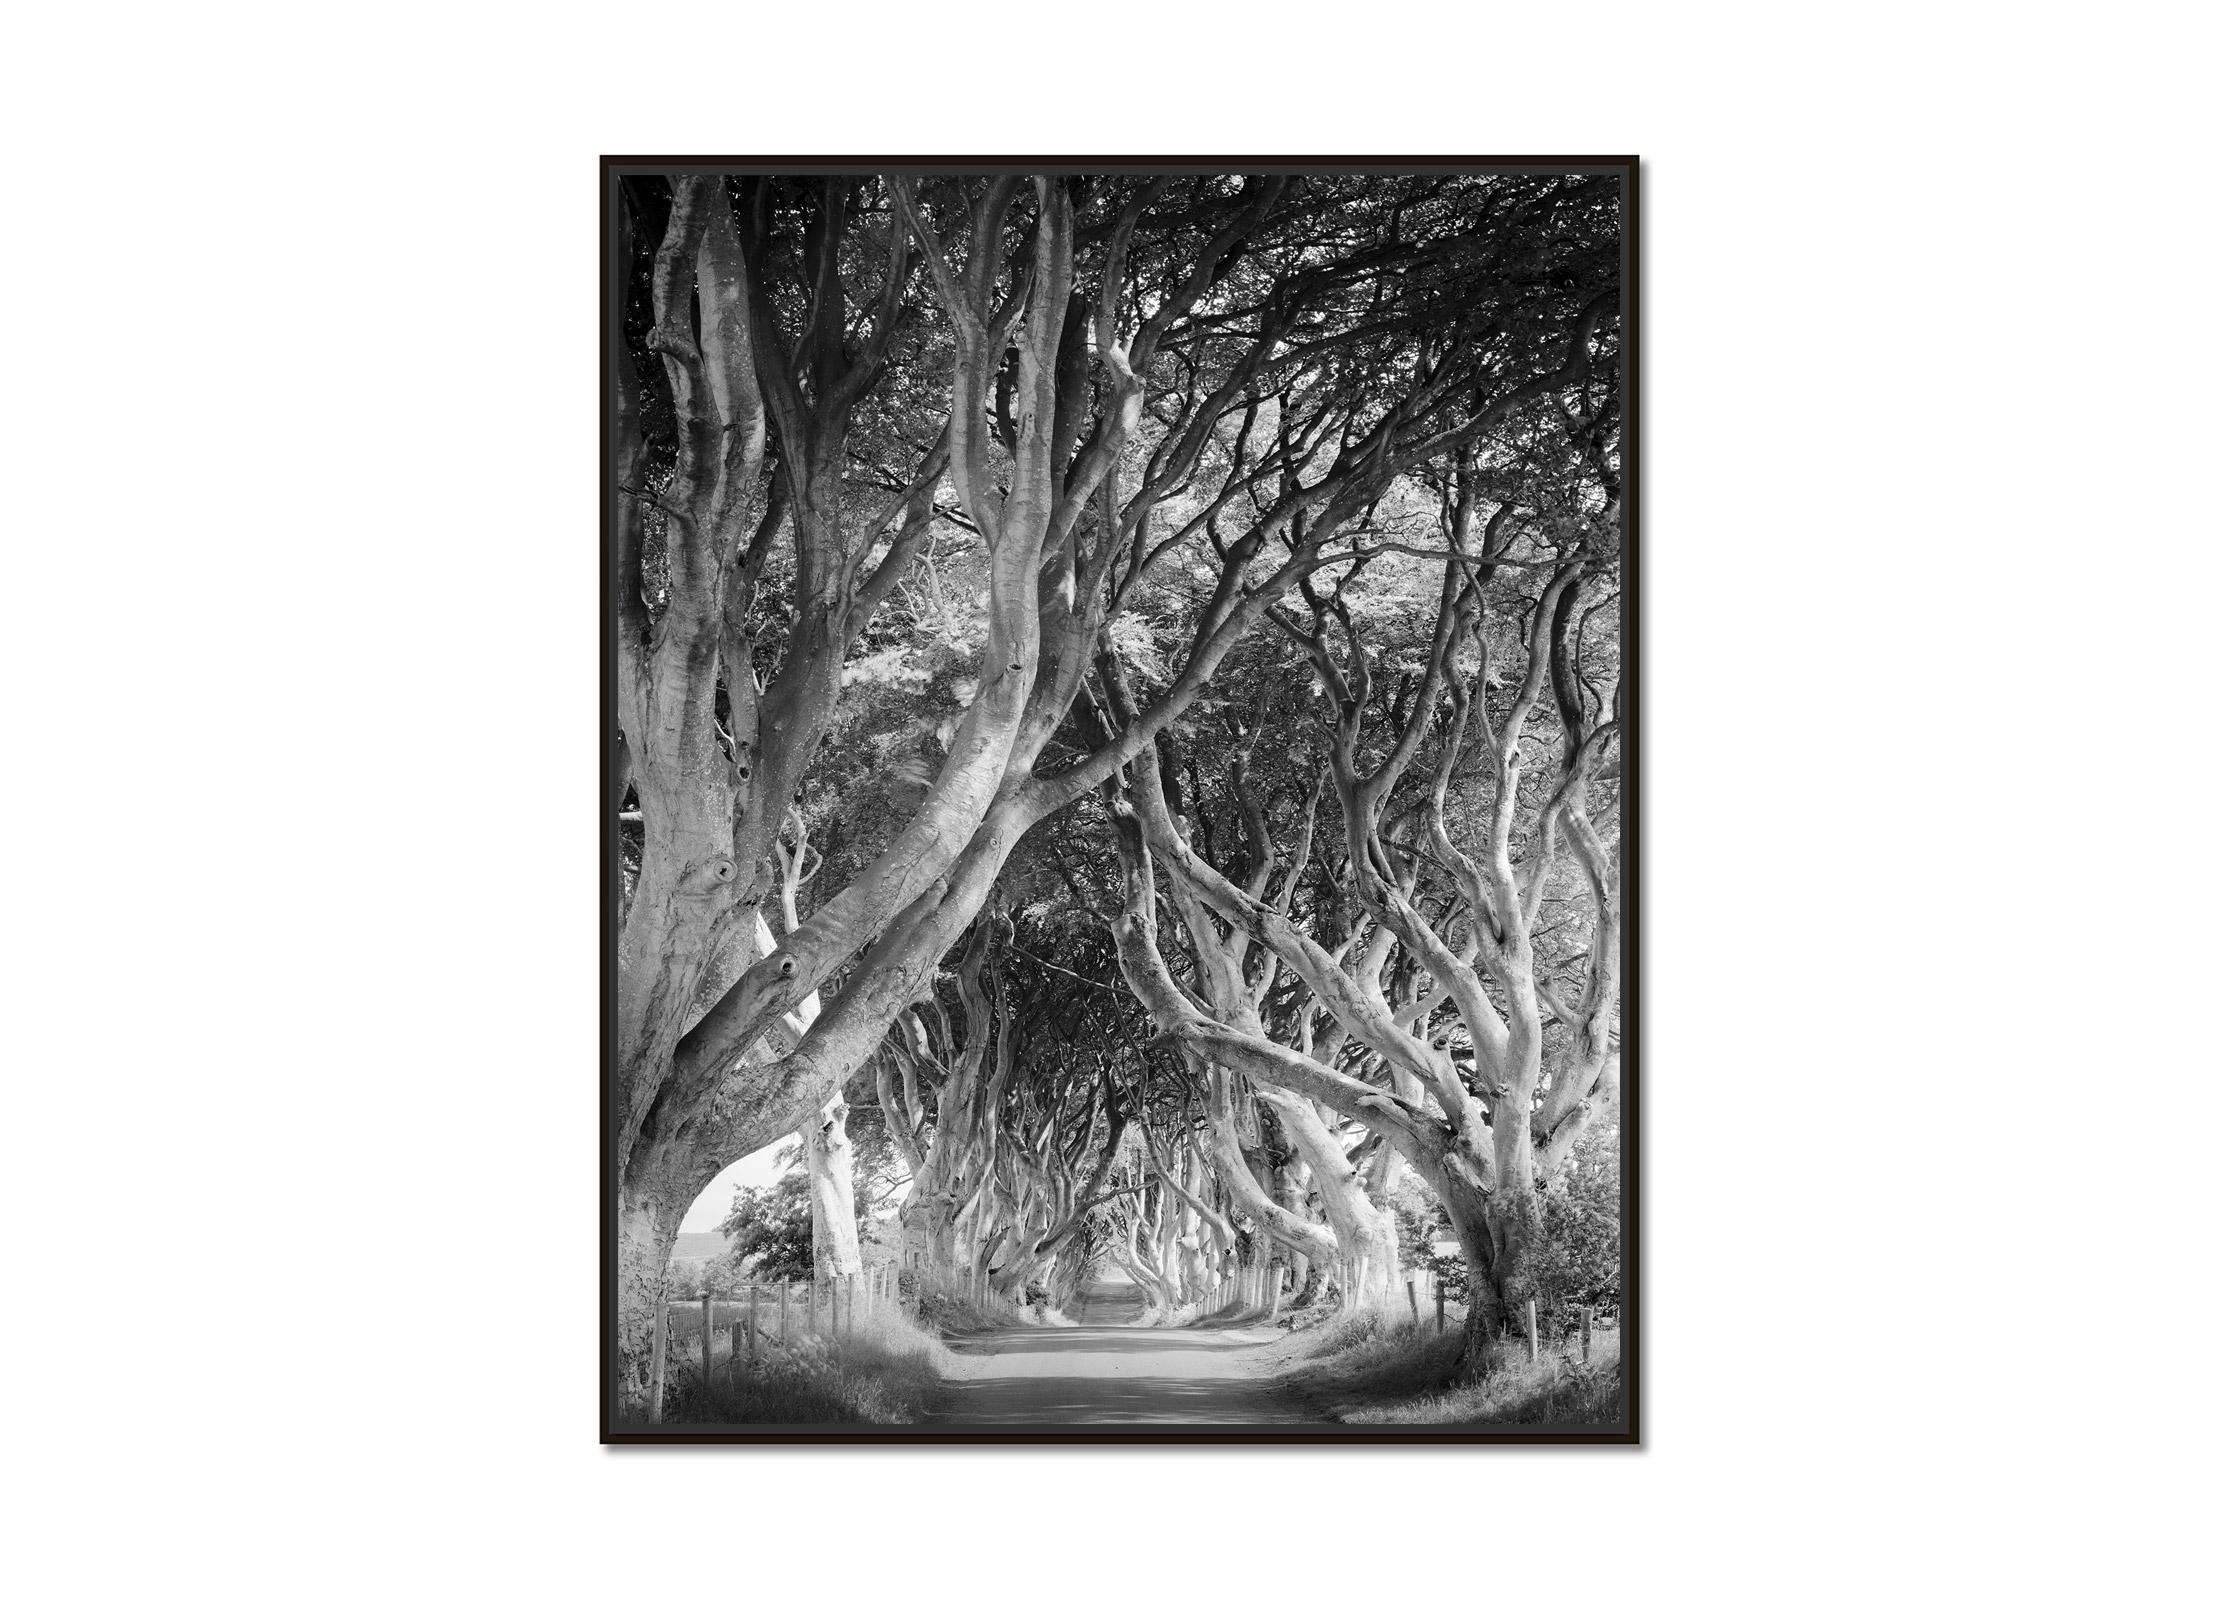 Dark Hedges, tree avenue, mystical forest, black & white photography, landscape - Photograph by Gerald Berghammer